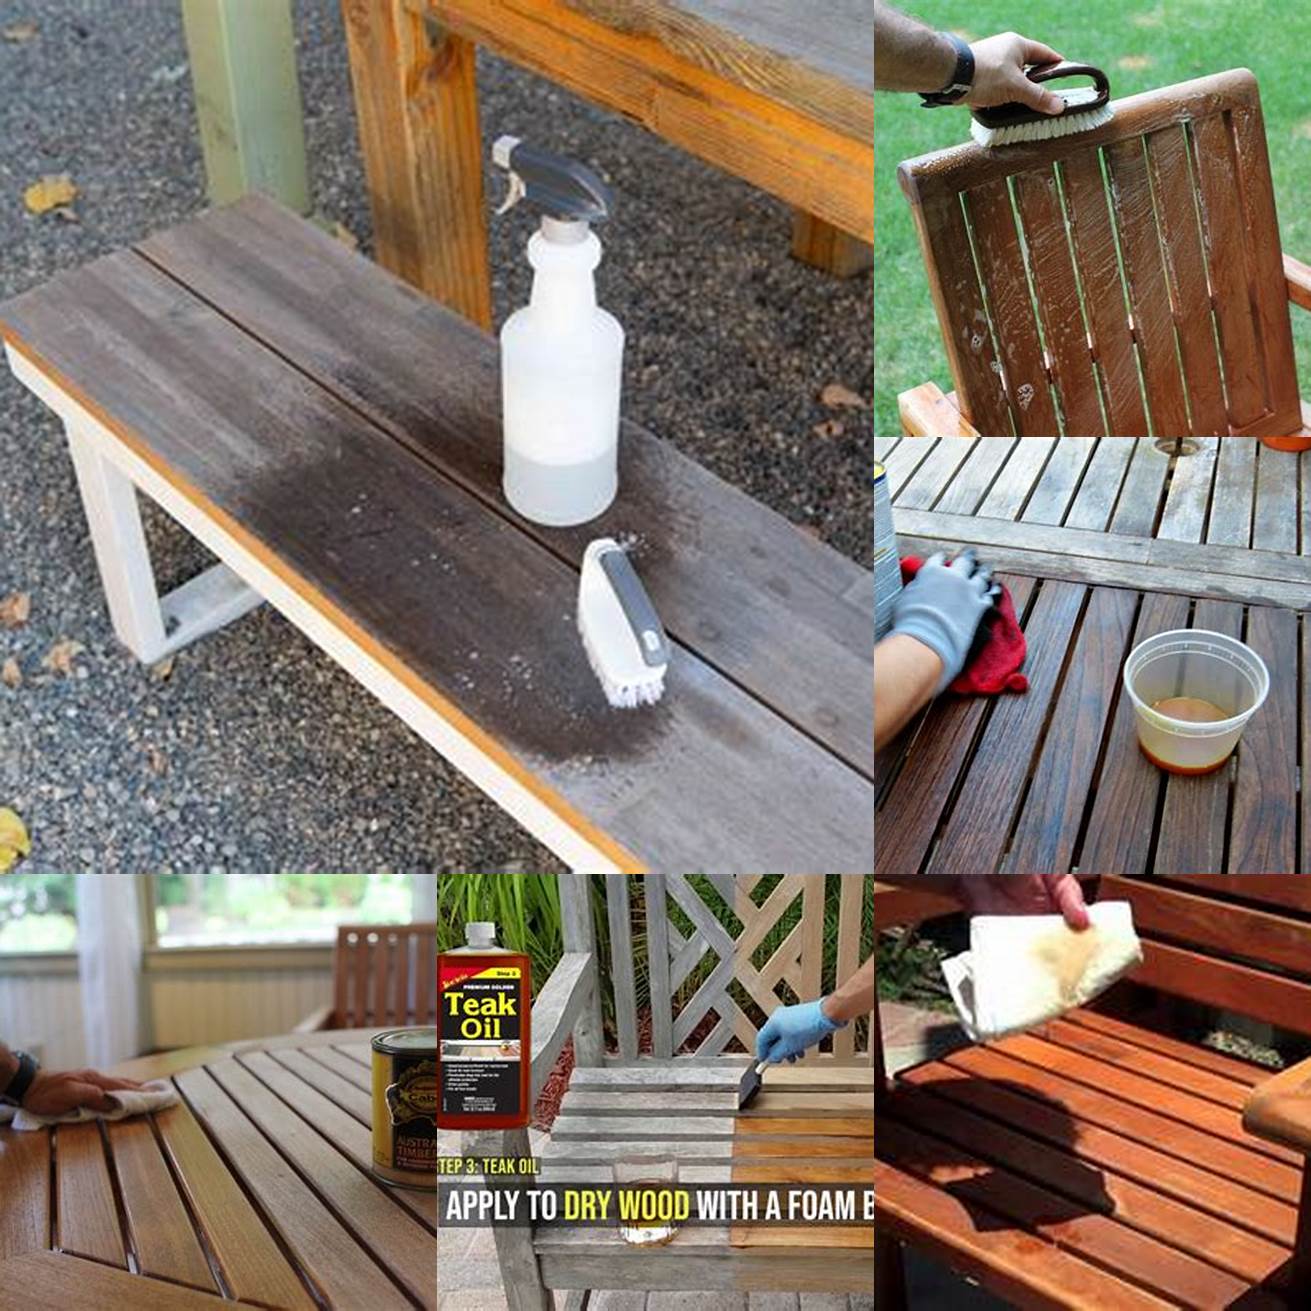 Picture of a person cleaning up a teak oil stain